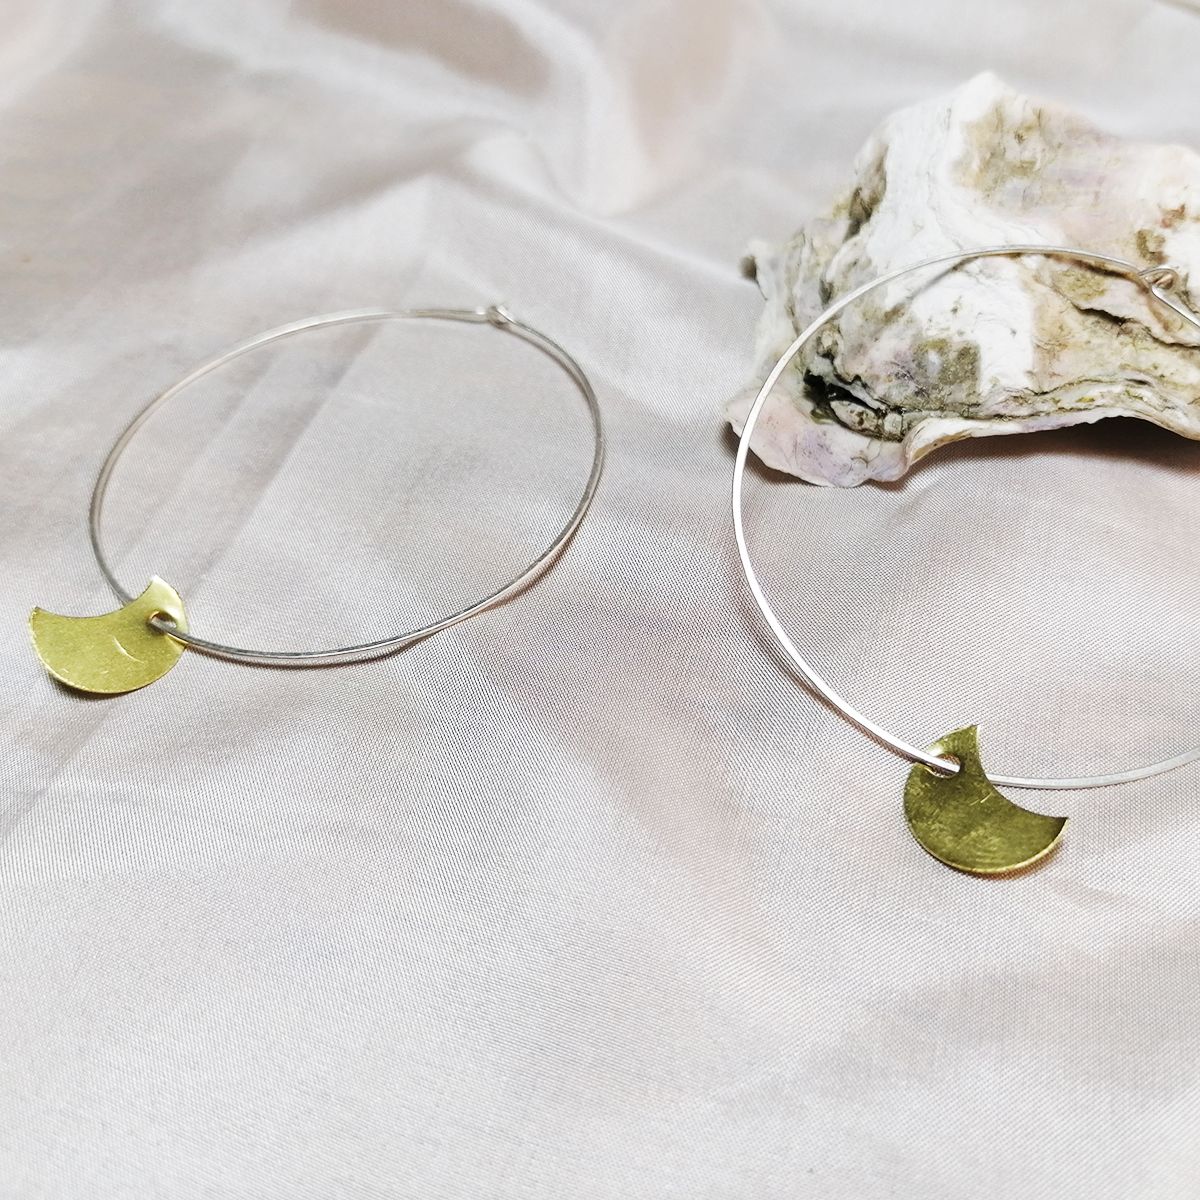 How To Make Wire Hoop Earrings & Customise Them